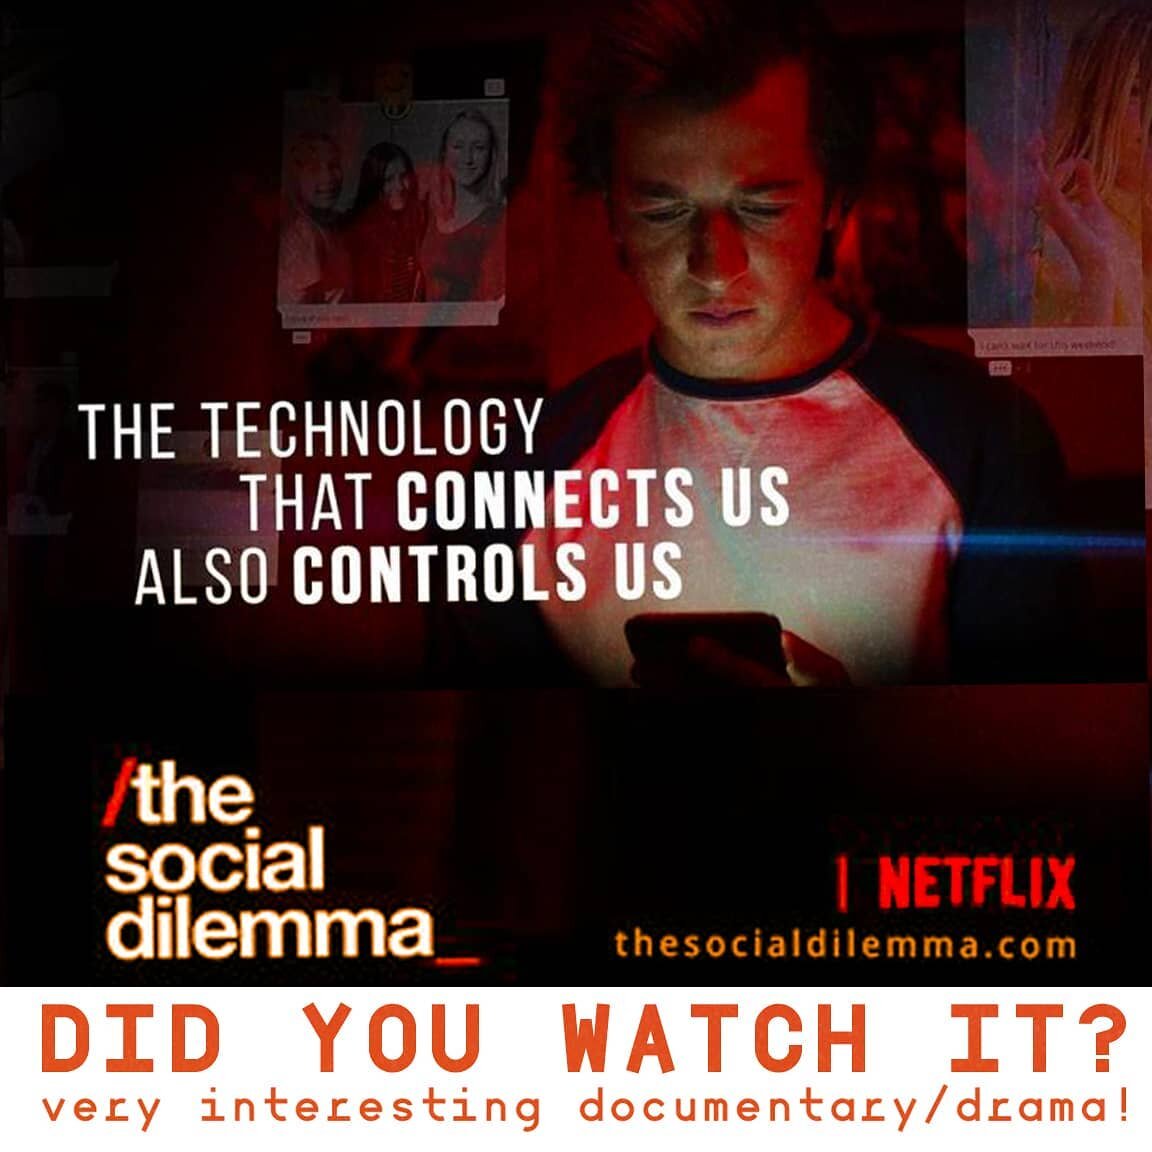 The Social Dilemma !? A really interesting Documentary/Drama. You can watch it on #netflix 
The Technology That Connects Us Also Controls Us.

#thetechnology #control #socialmedia #wwwir #future #futureclassroom #wiewirlebenwollen #kulturjahr2020 #gr